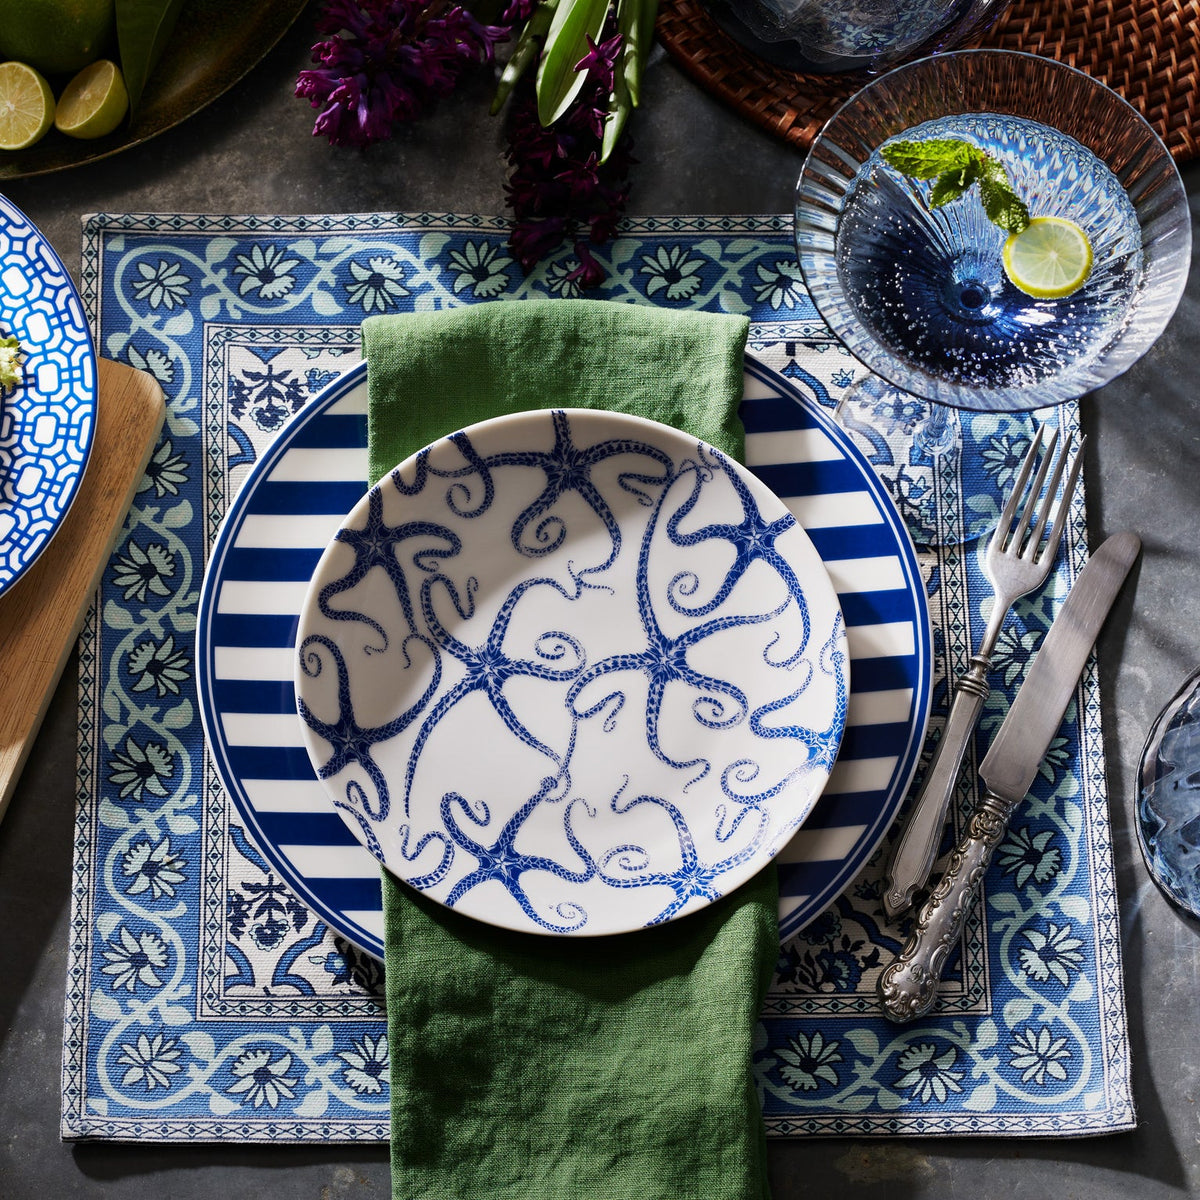 A dinner setting with Caskata Artisanal Home&#39;s premium porcelain Starfish Coupe Salad Plate featuring starfish and striped designs, a green napkin, silverware, and a cocktail with lime and mint, arranged on a decorative placemat.